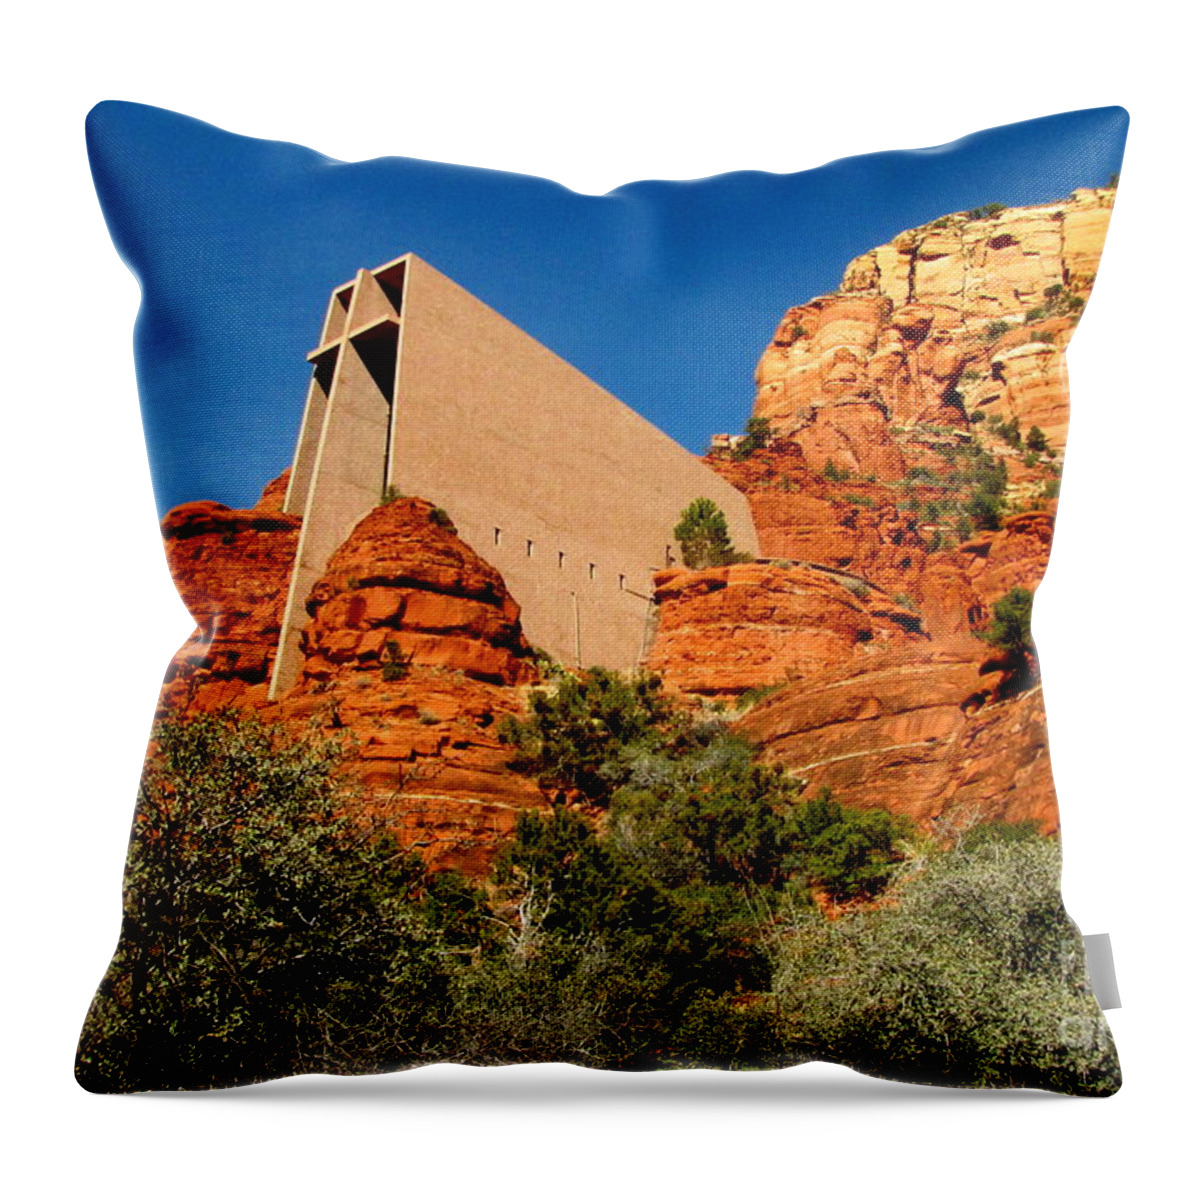 Chapel Of The Holy Cross Throw Pillow featuring the photograph Chapel Of The Holy Cross 2 by Marilyn Smith